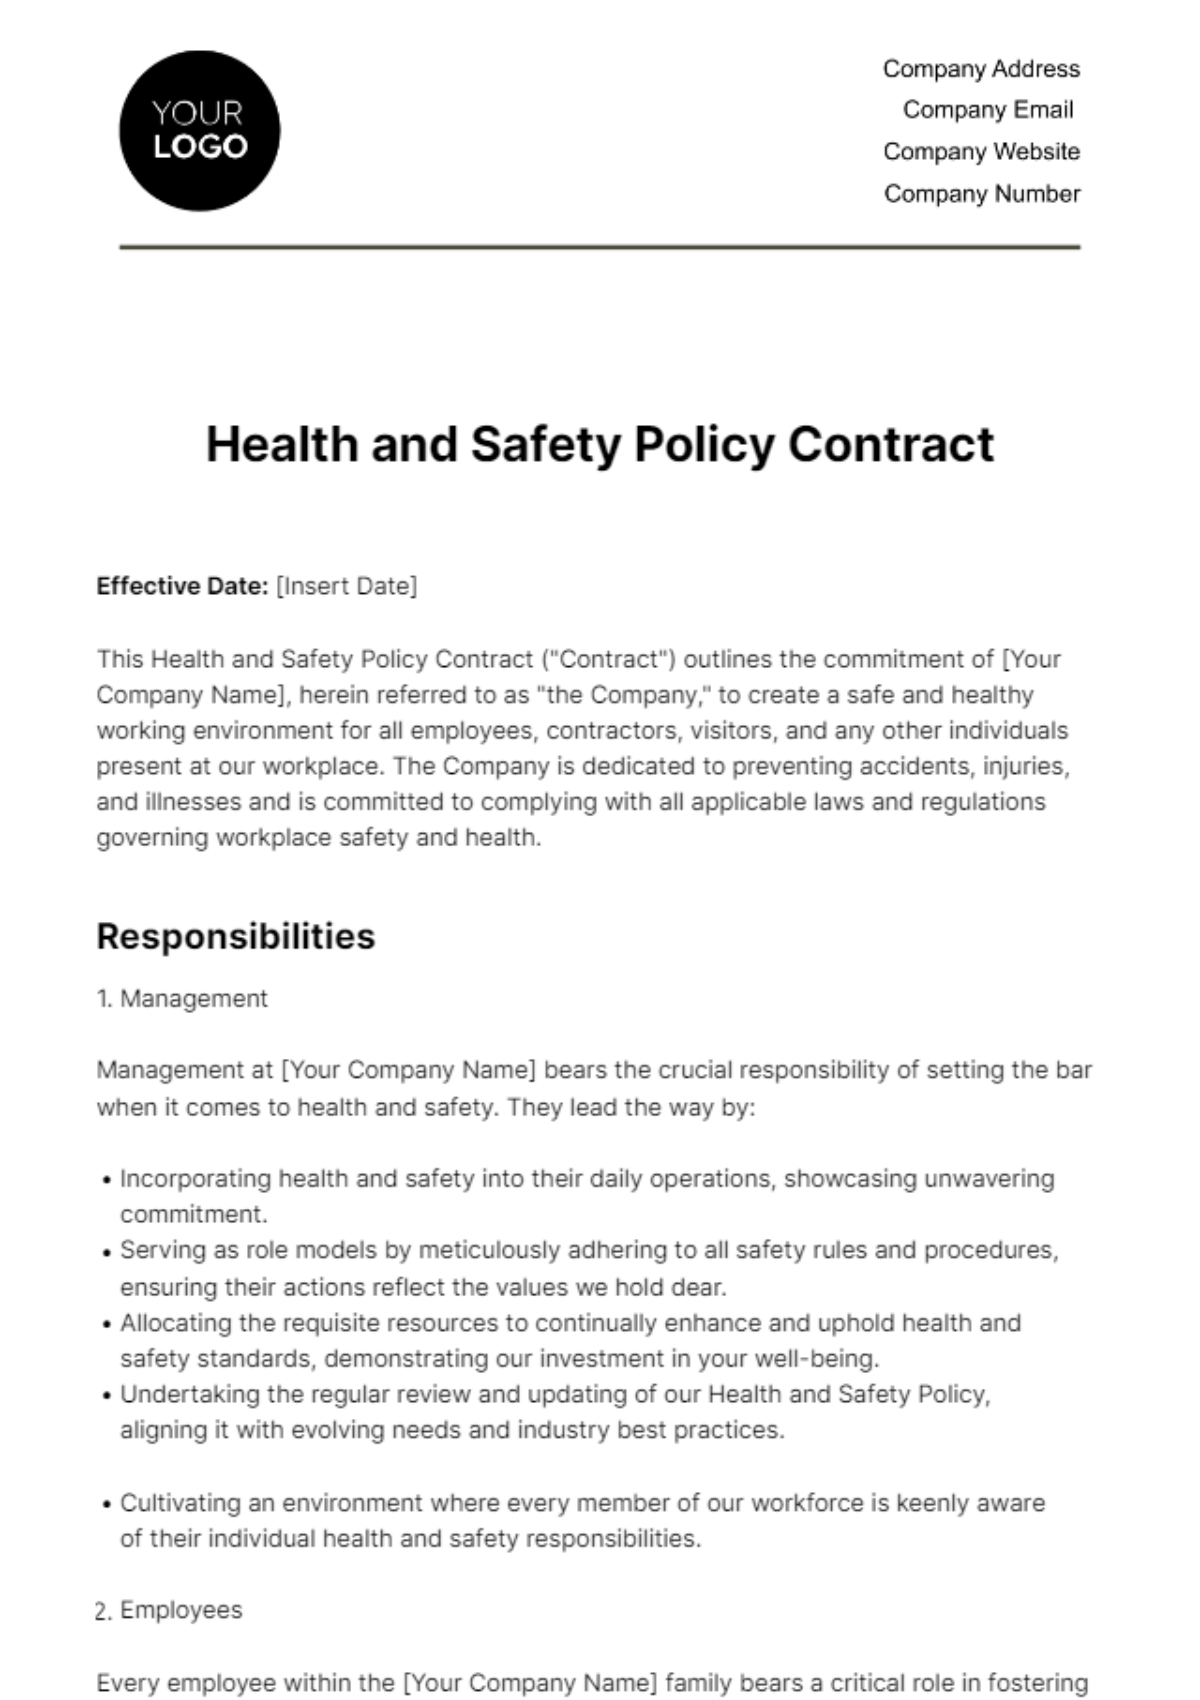 Free Health and Safety Policy Contract HR Template